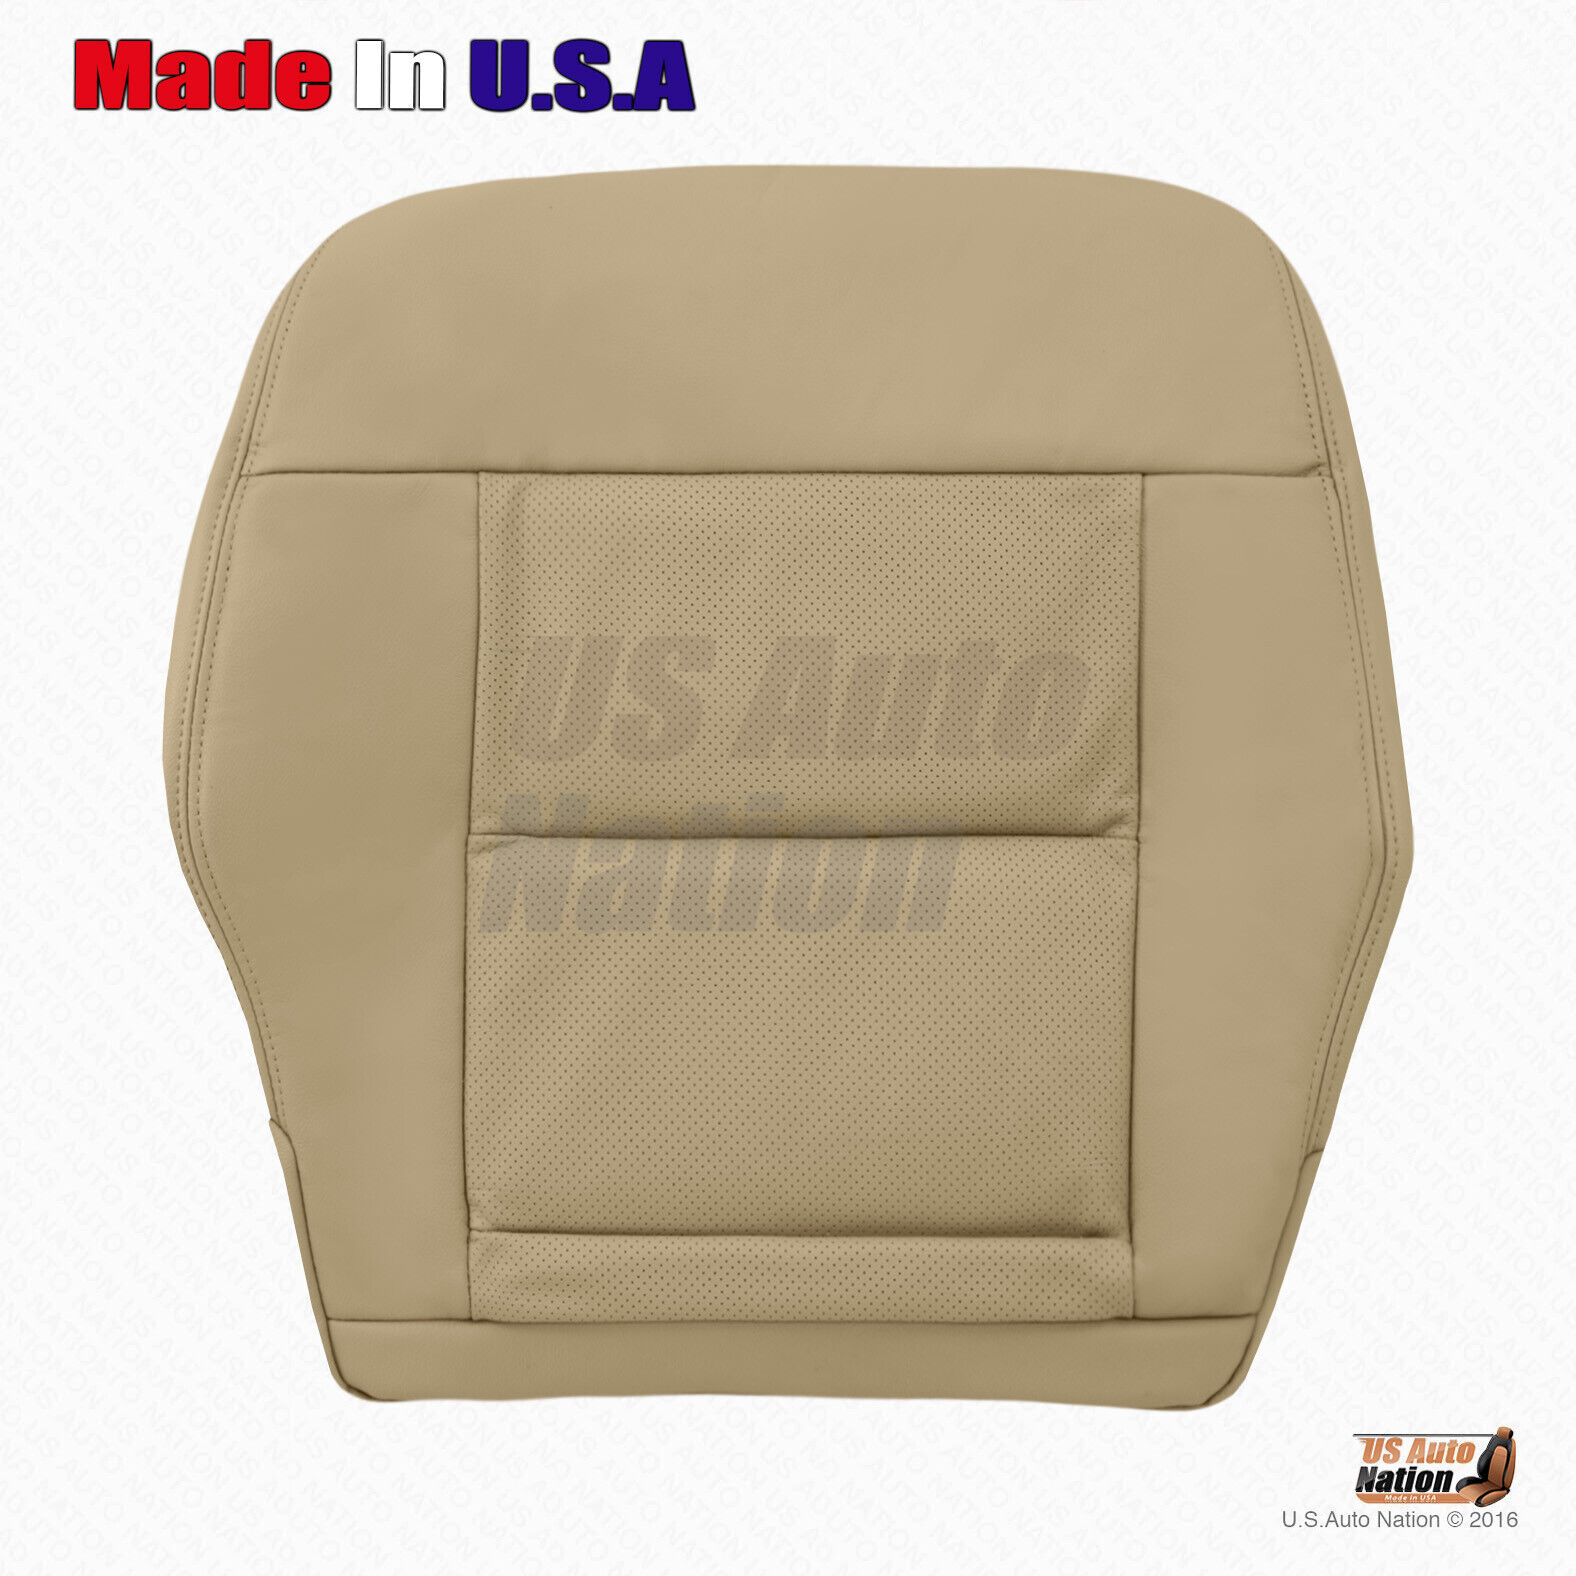 Fits 2011 2012 Mercedes Benz E350 E550 Tan Bottom Perforated Leather Seat Cover